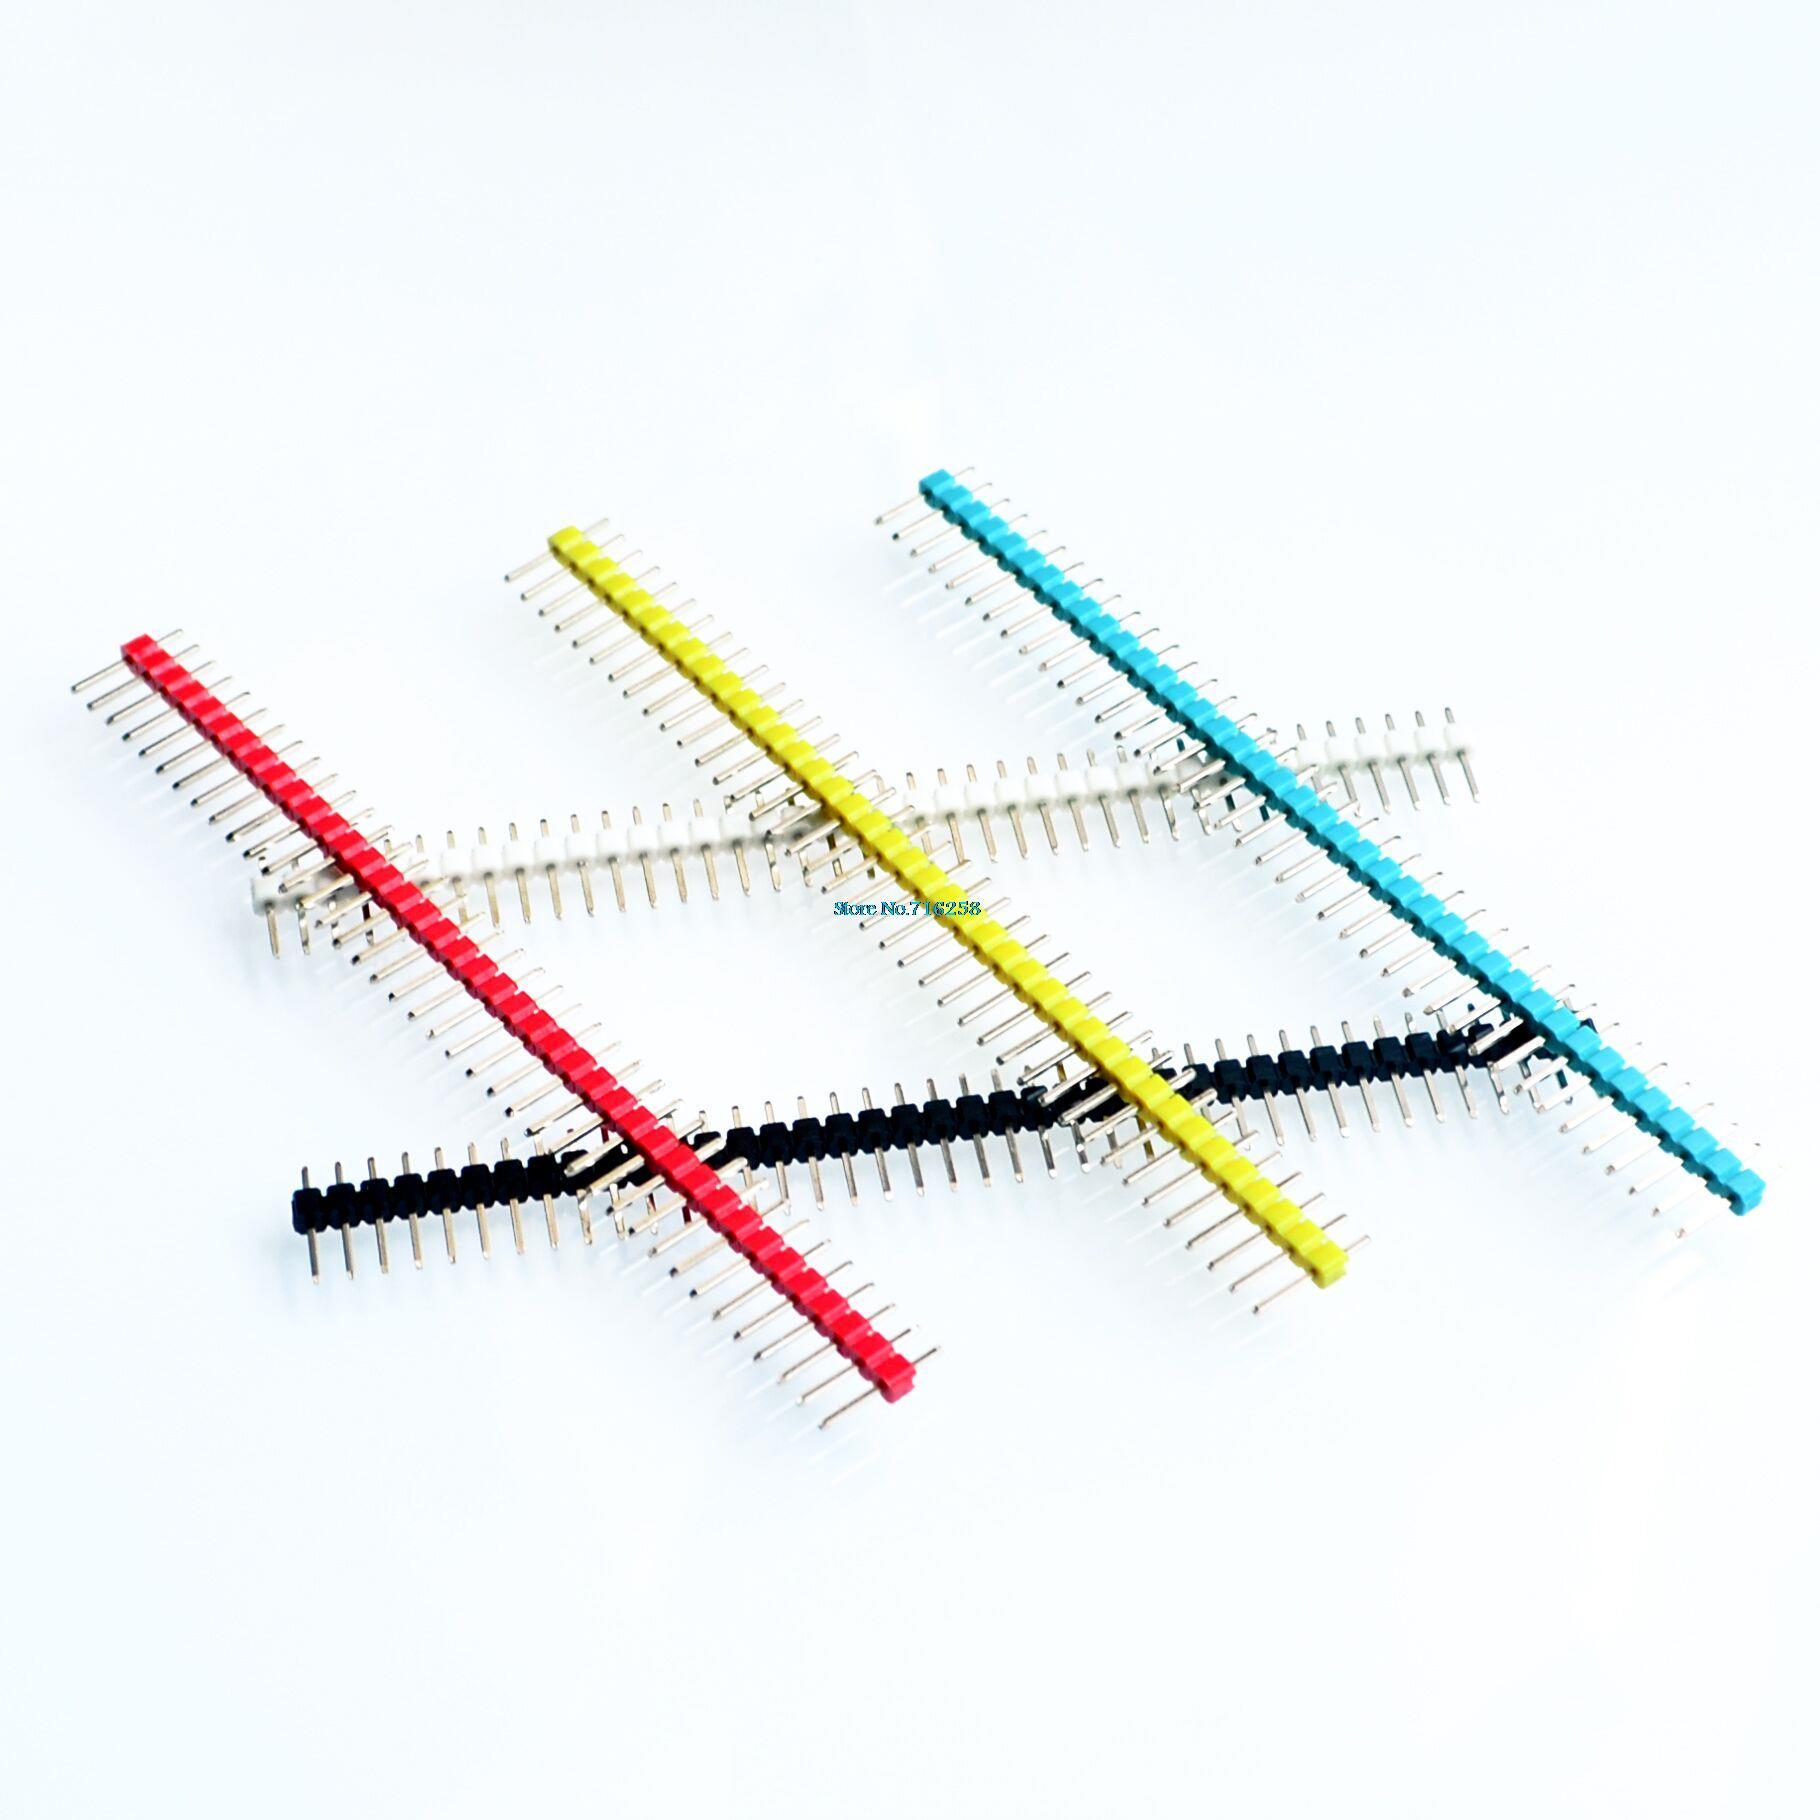 50pcs-lot-2-54mm-Black-White-Red-Yellow-Blue-Single-Row-Male-1X40-Pin-Header-Strip-Gold-plated-ROHS